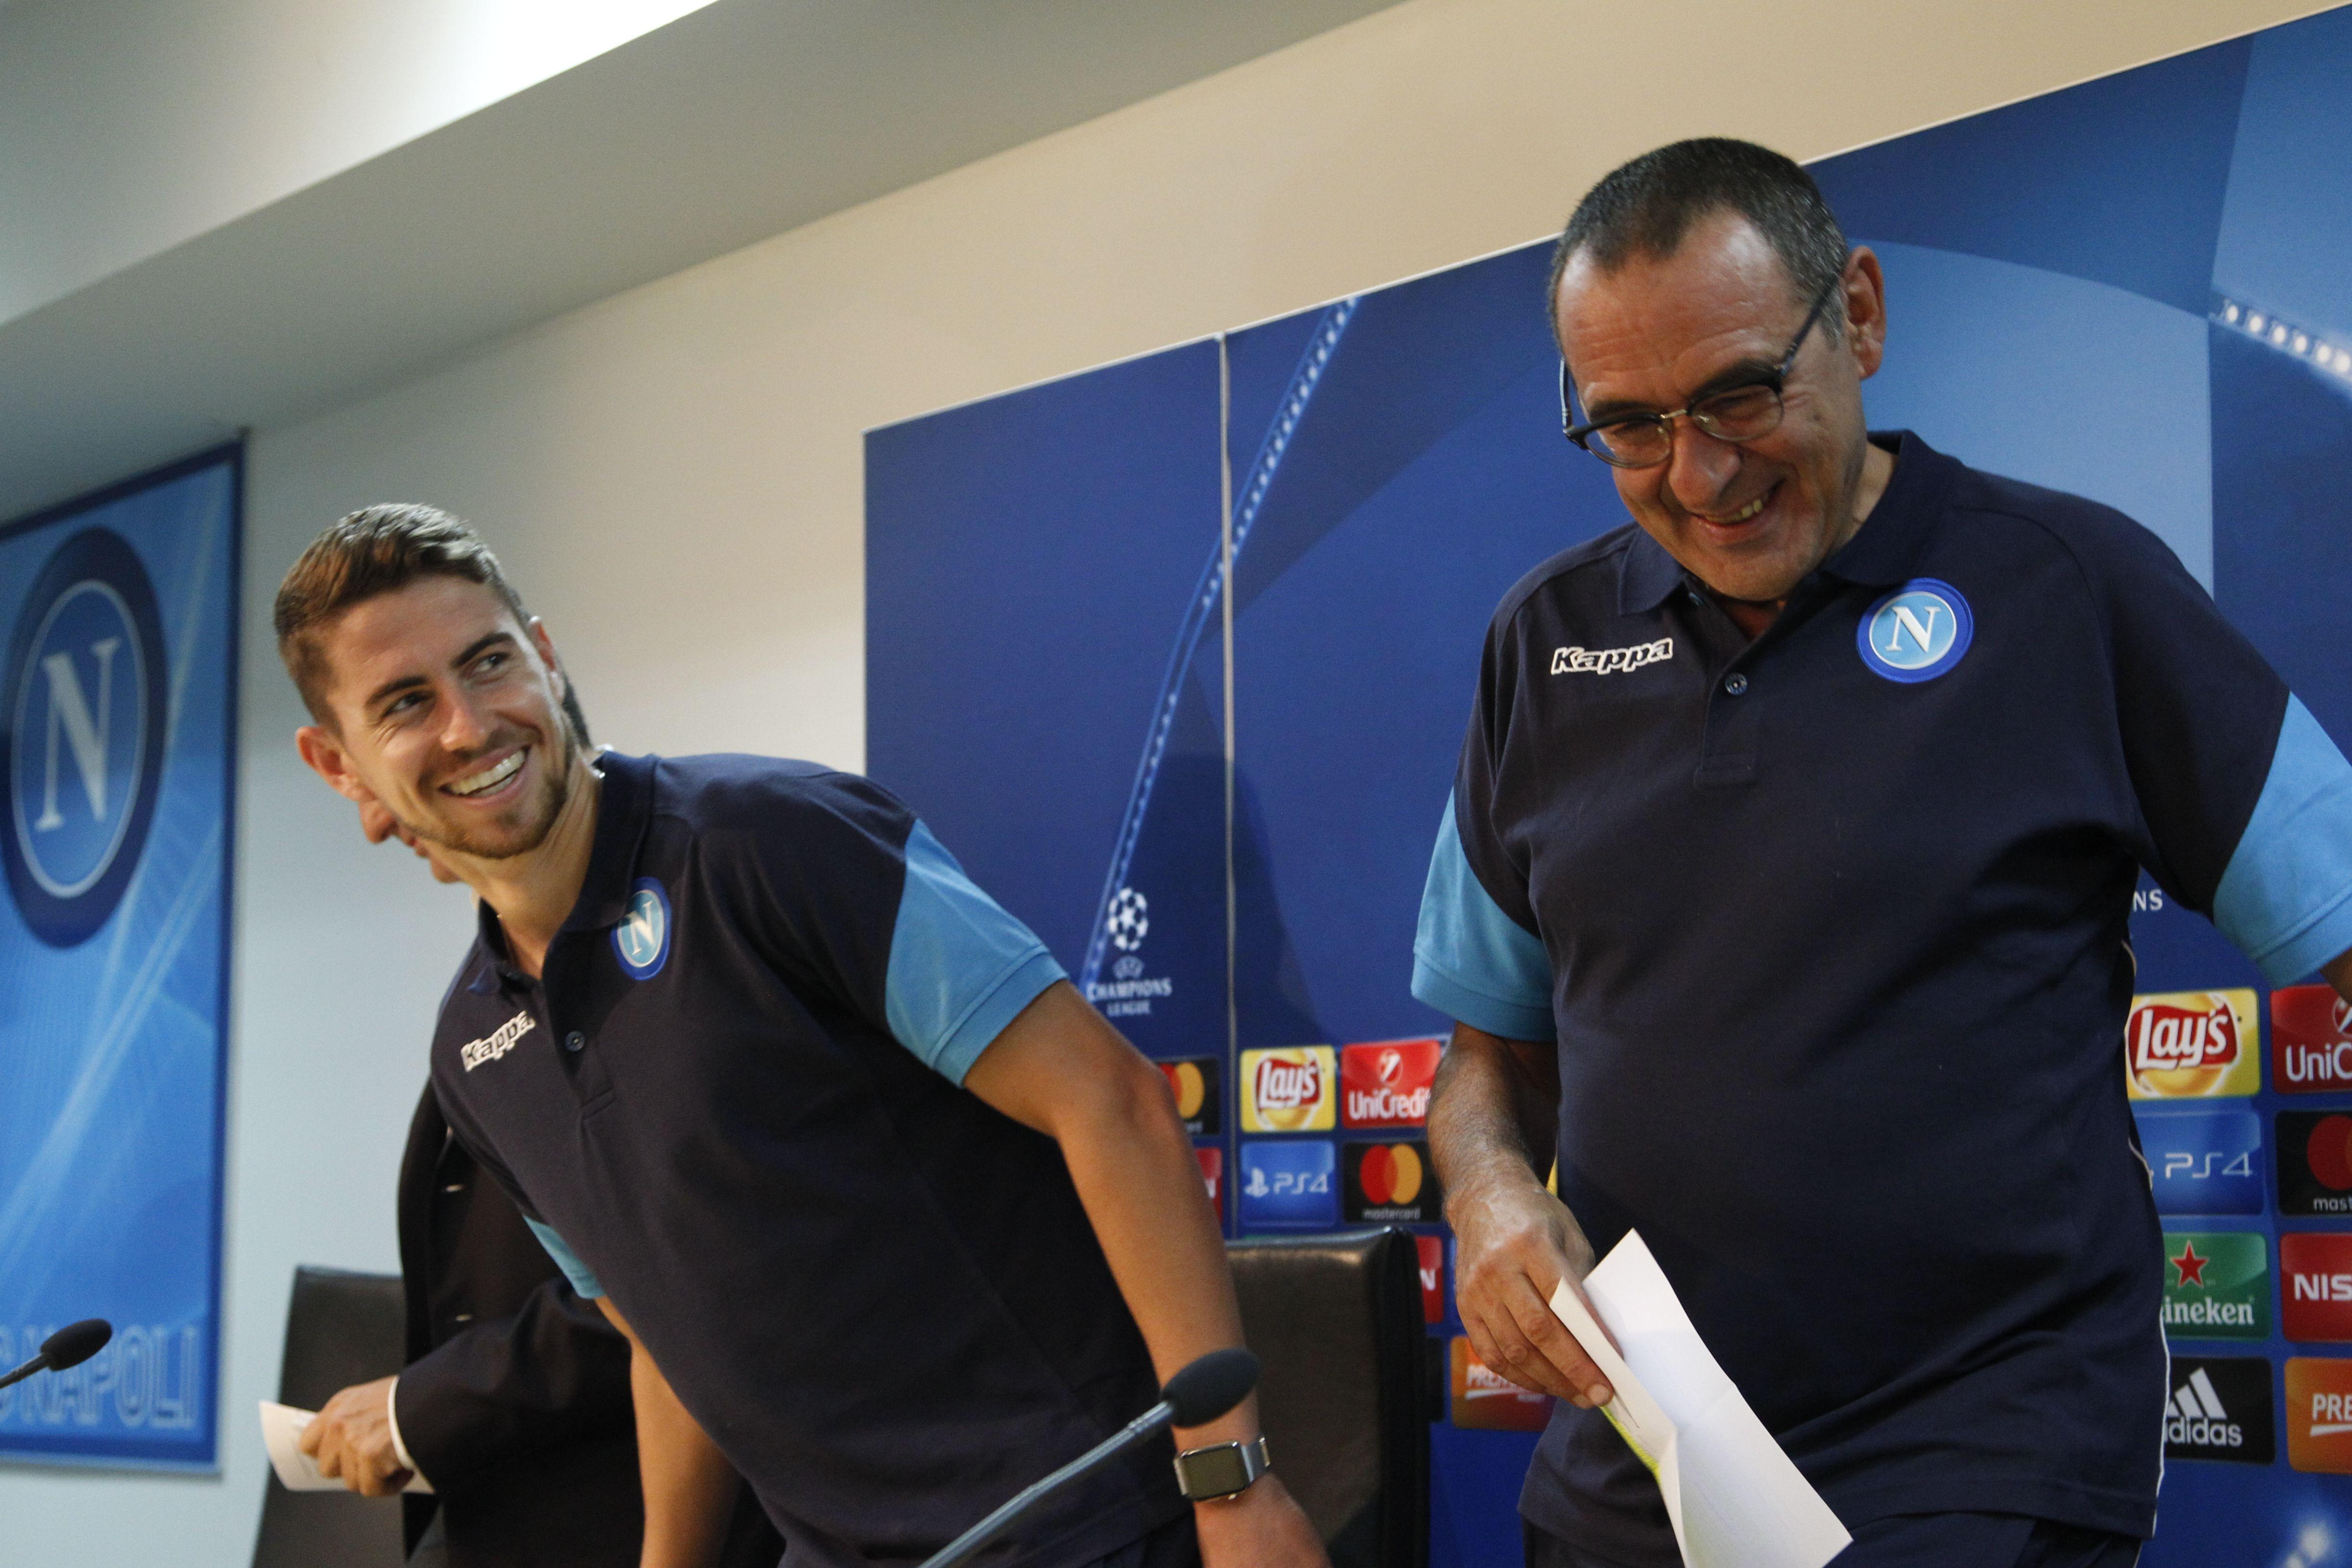 Chelsea close in on double £57million deal for Maurizio Sarri and Jorginho from Napoli